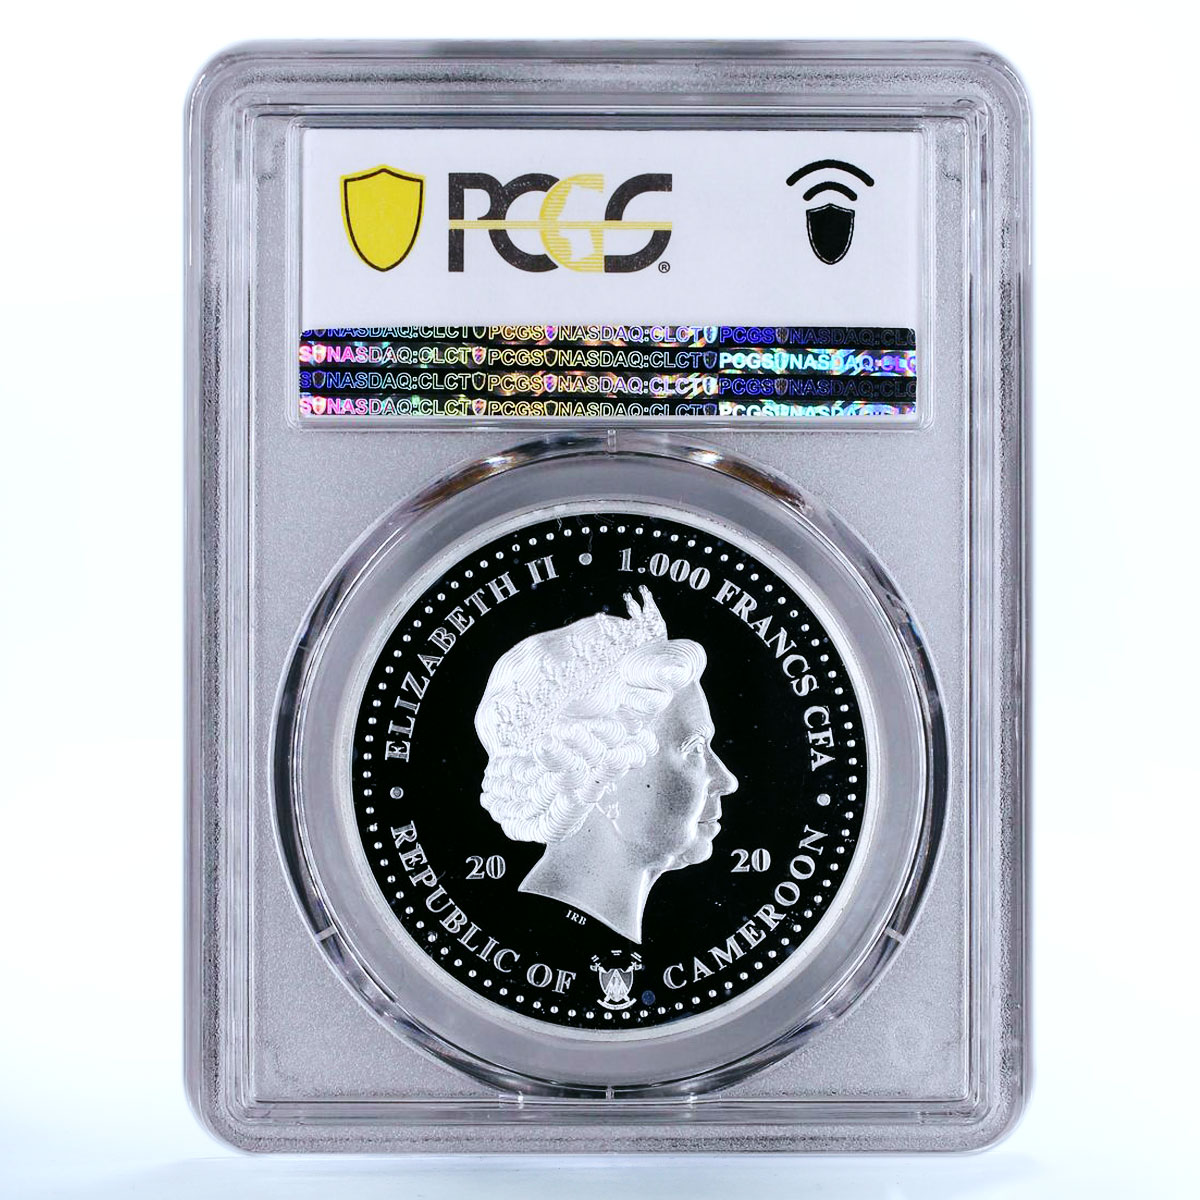 Cameroon 1000 francs Princess of Monaco Grace Kelly MS68 PCGS silver coin 2020